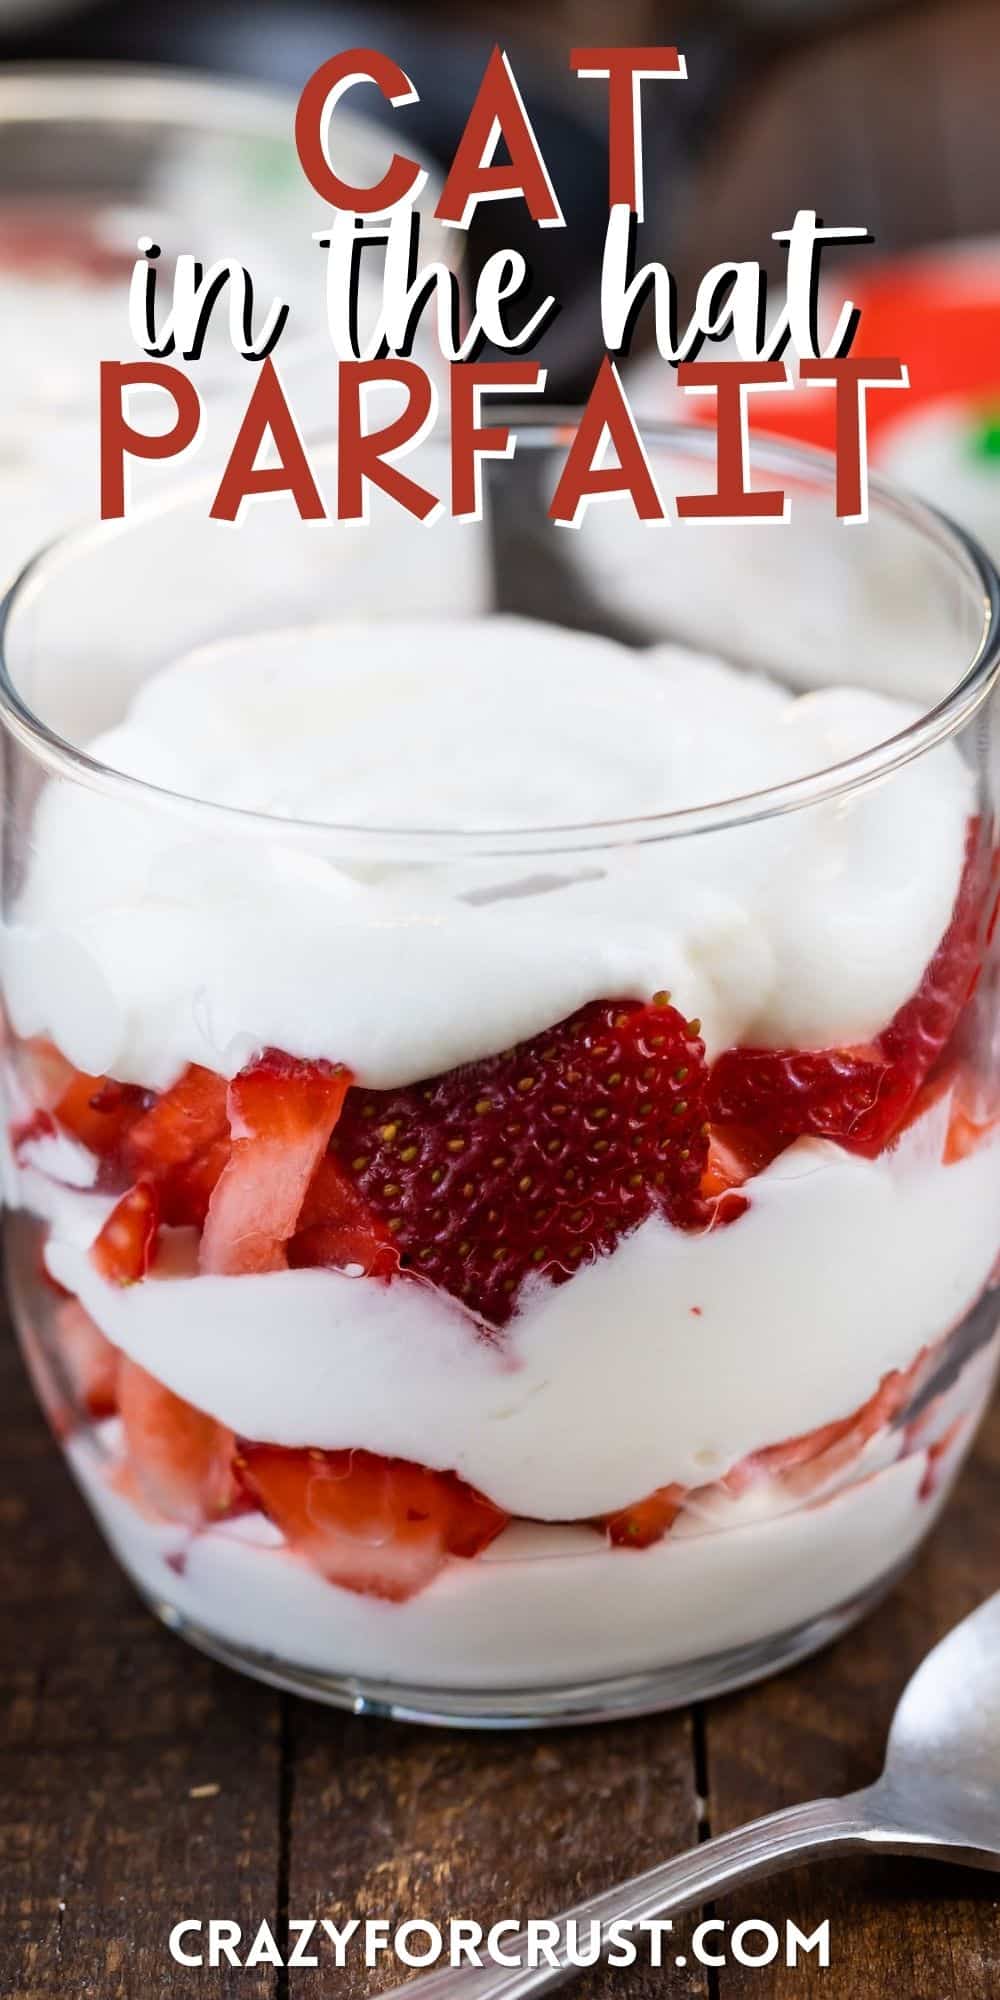 cream and strawberries parfait in a clear class with words on the image.